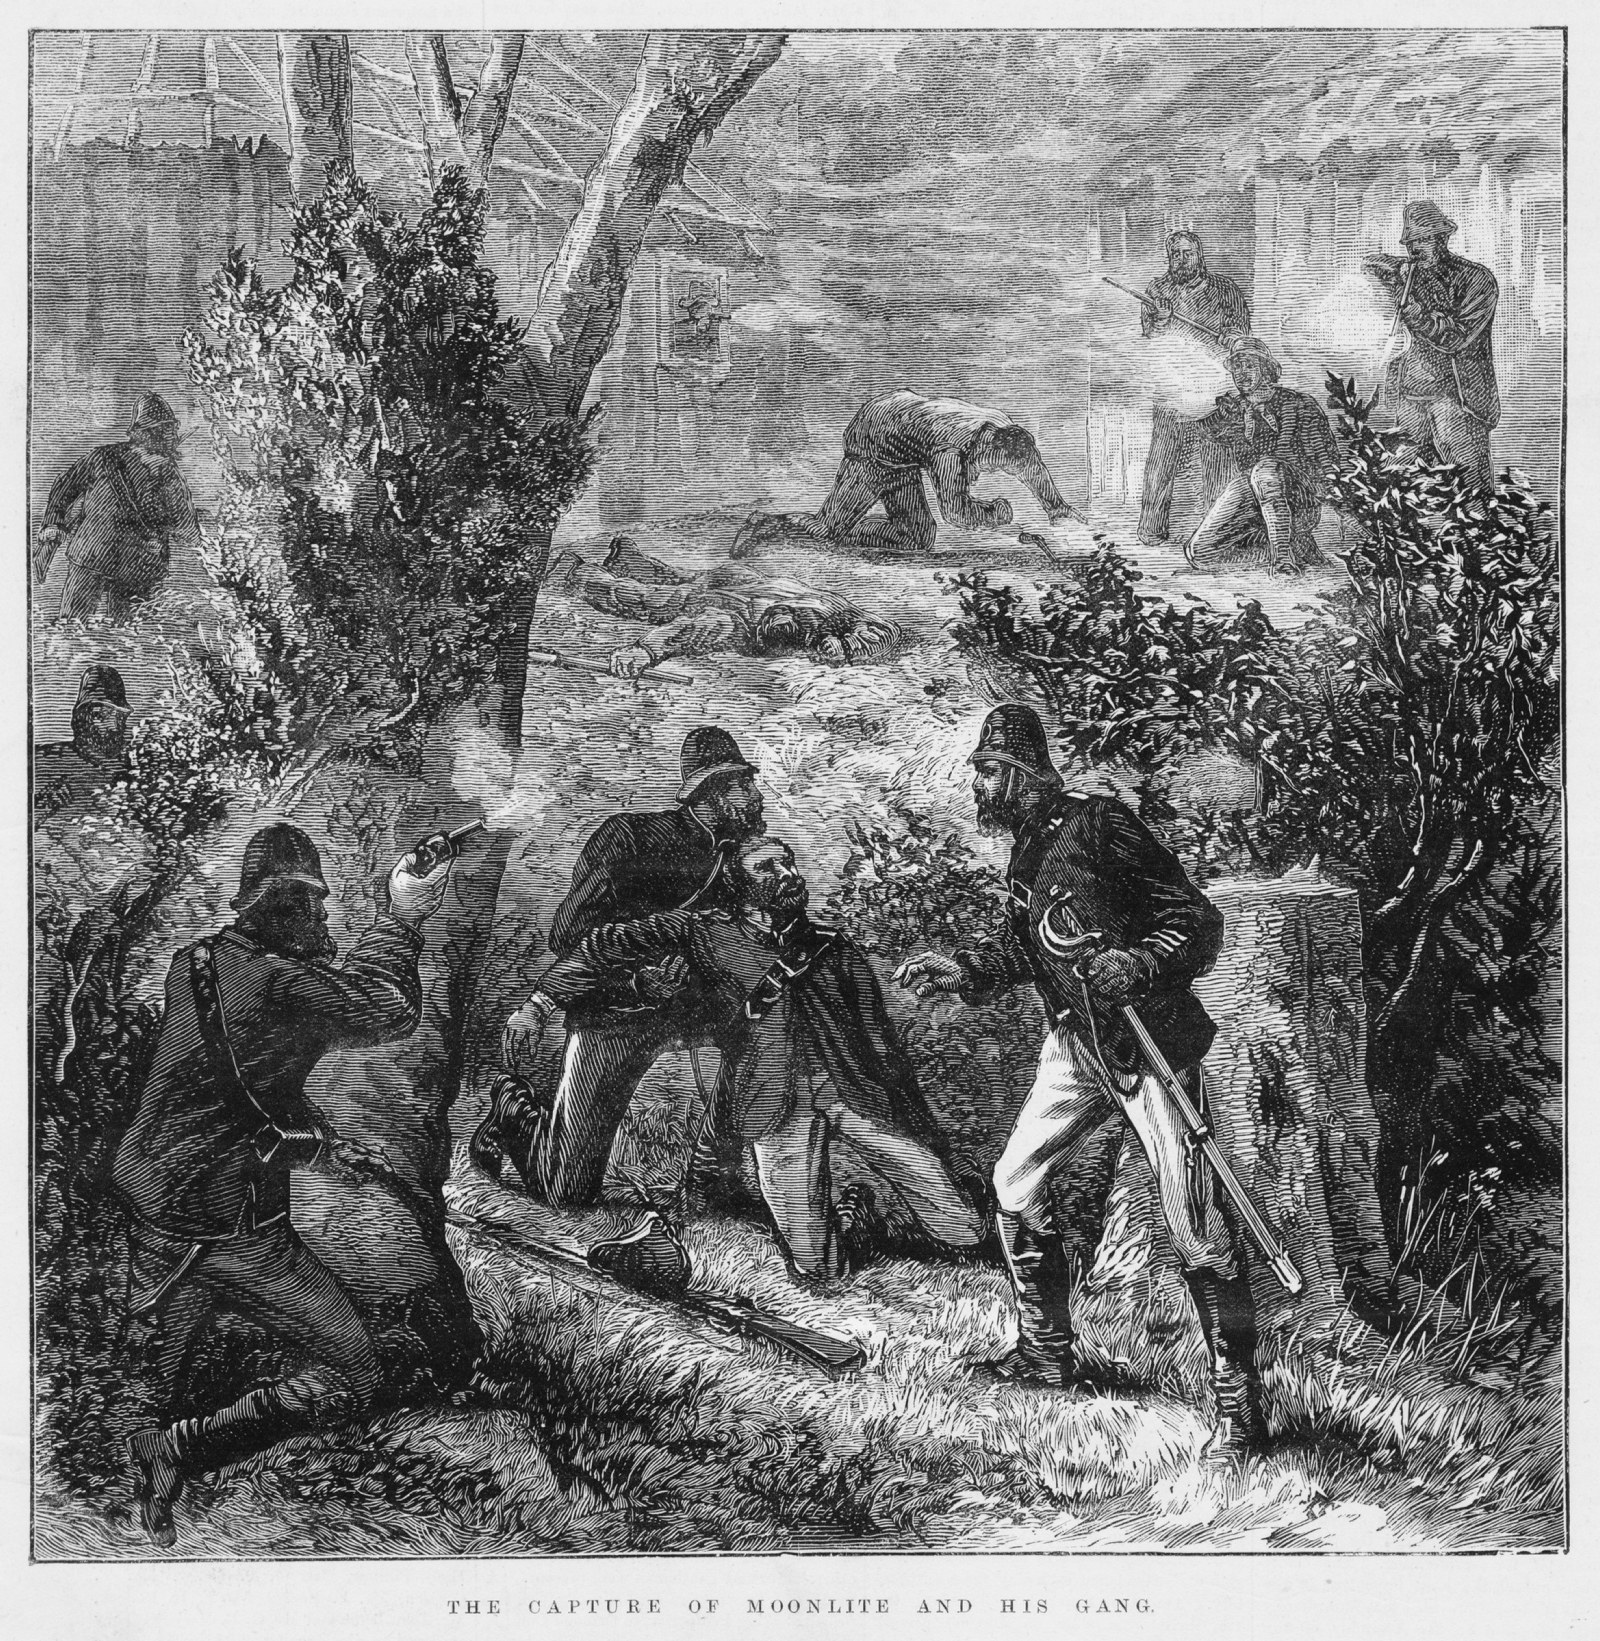 Black and white engraved illustration of shootout between bushrangers and police.